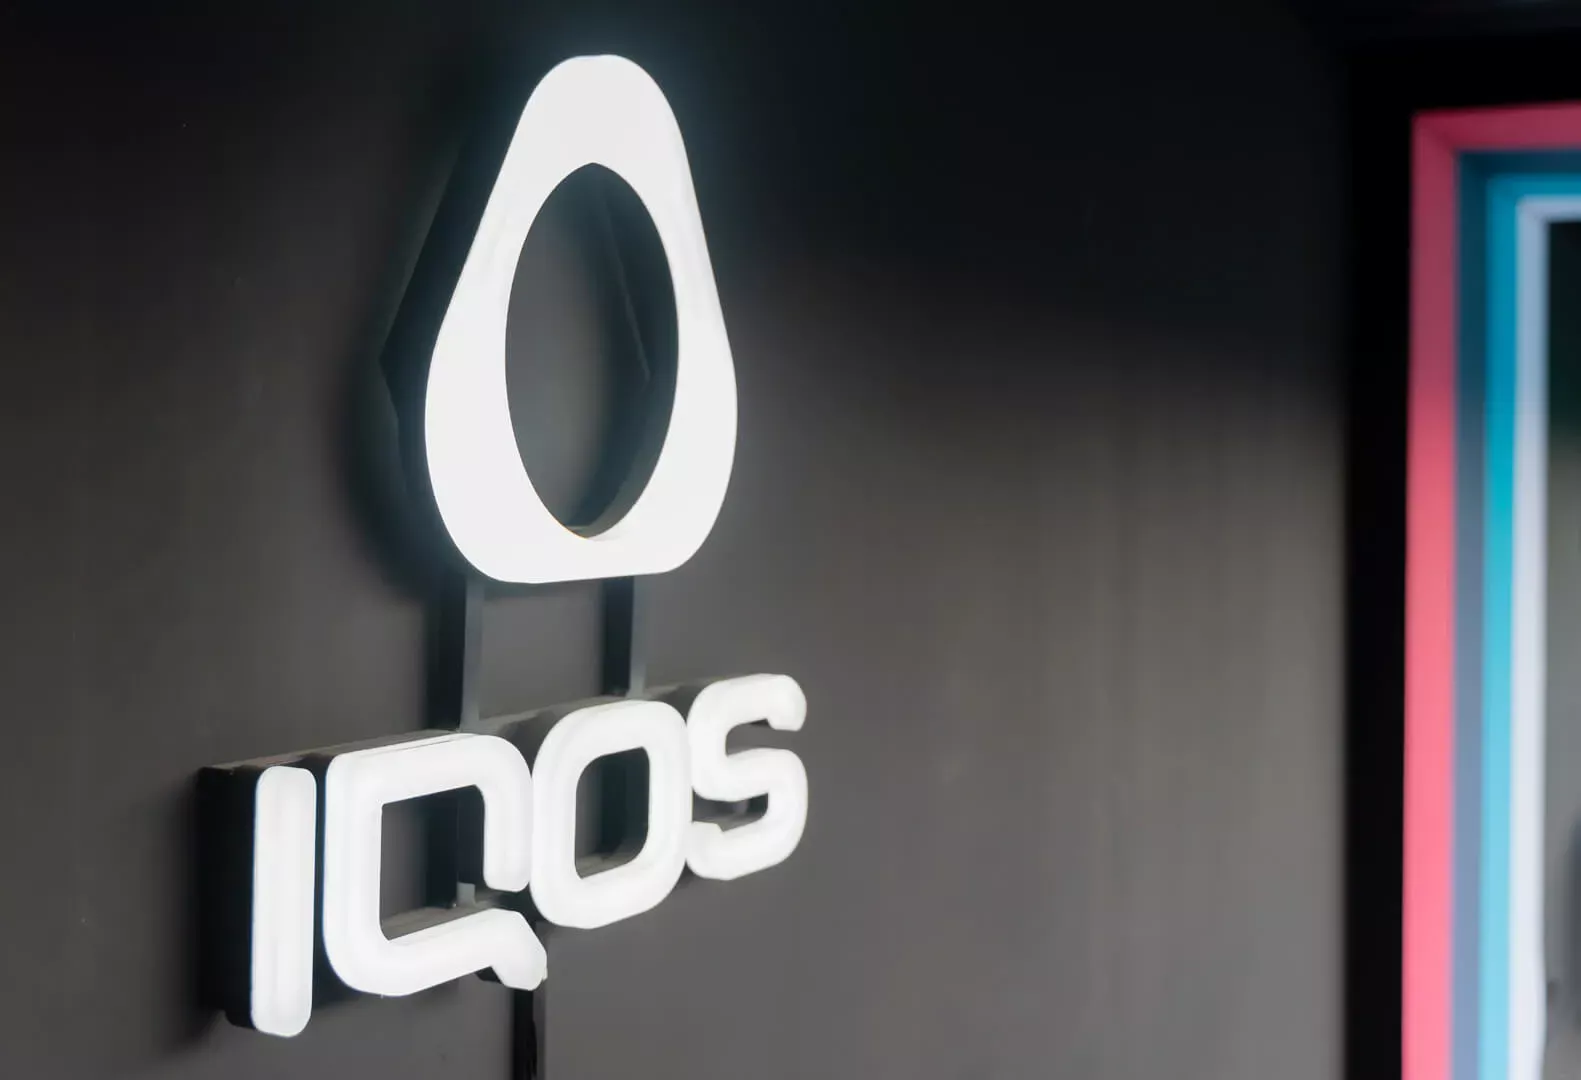 Iqos - IQOS logo and lettering made of plexiglass, backlit in white